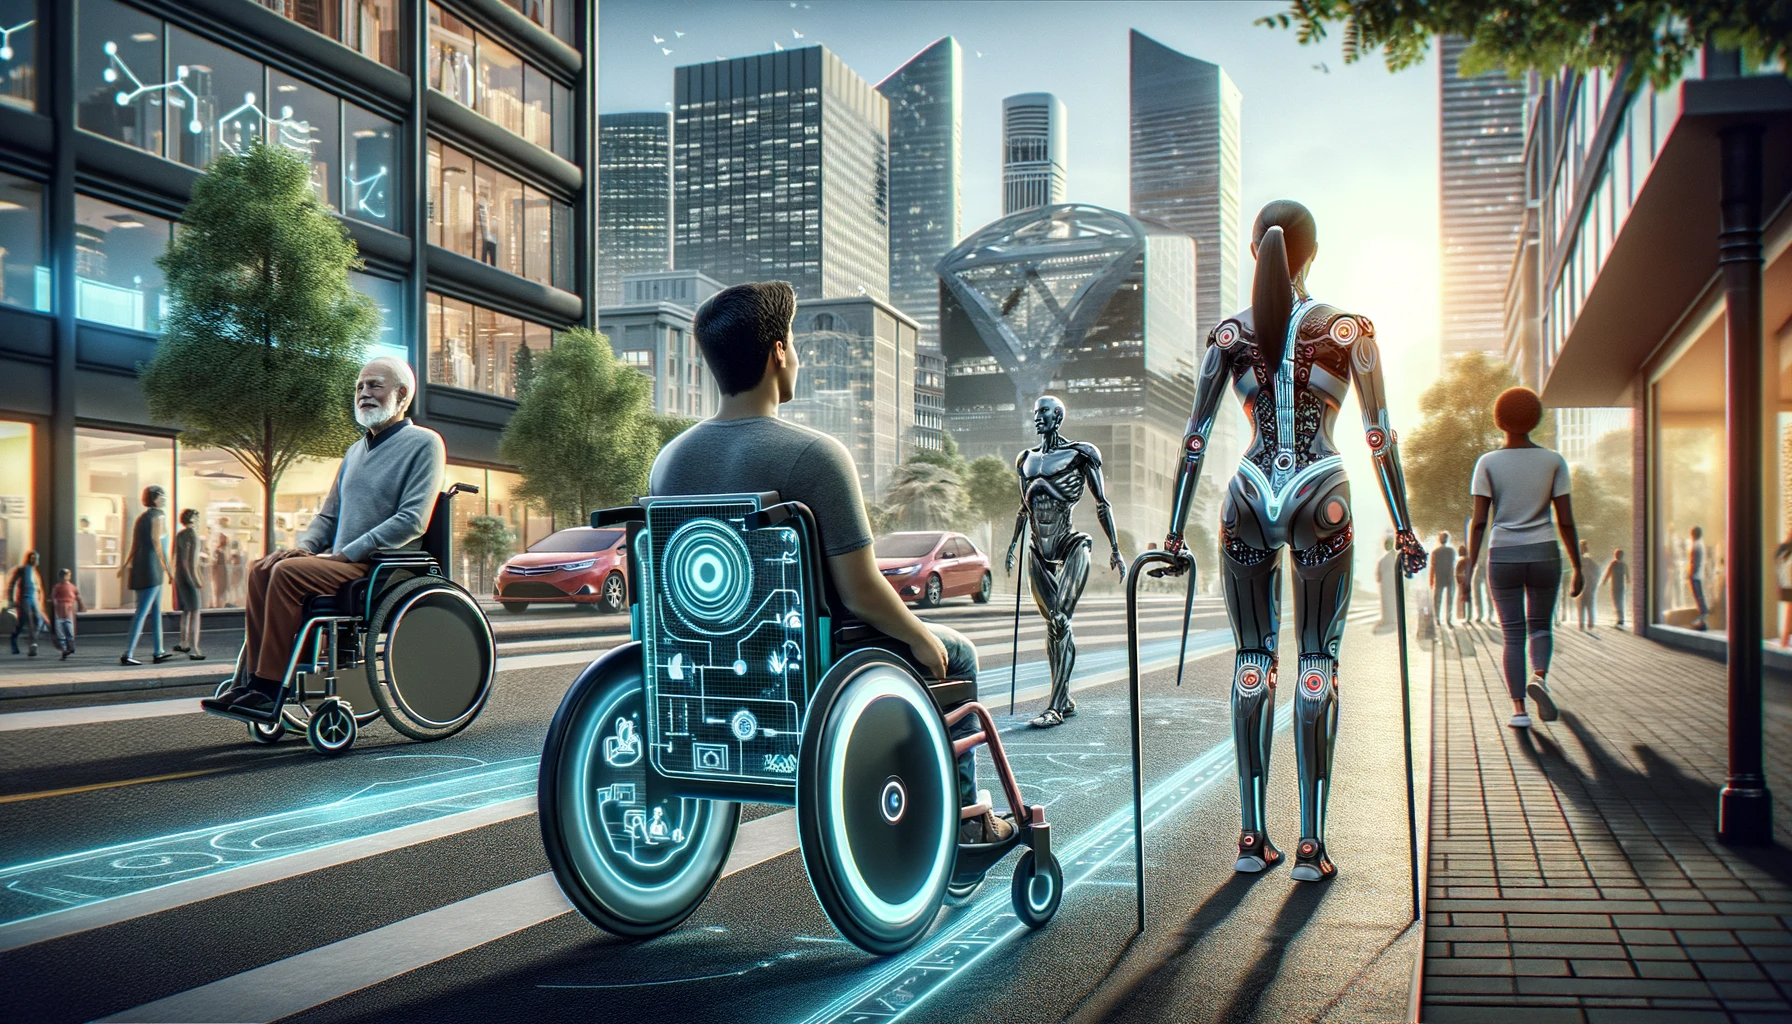 A futuristic depiction of AI-powered mobility aids, like a smart wheelchair and an exoskeleton, enhanced with AI for improved navigation and ease of use